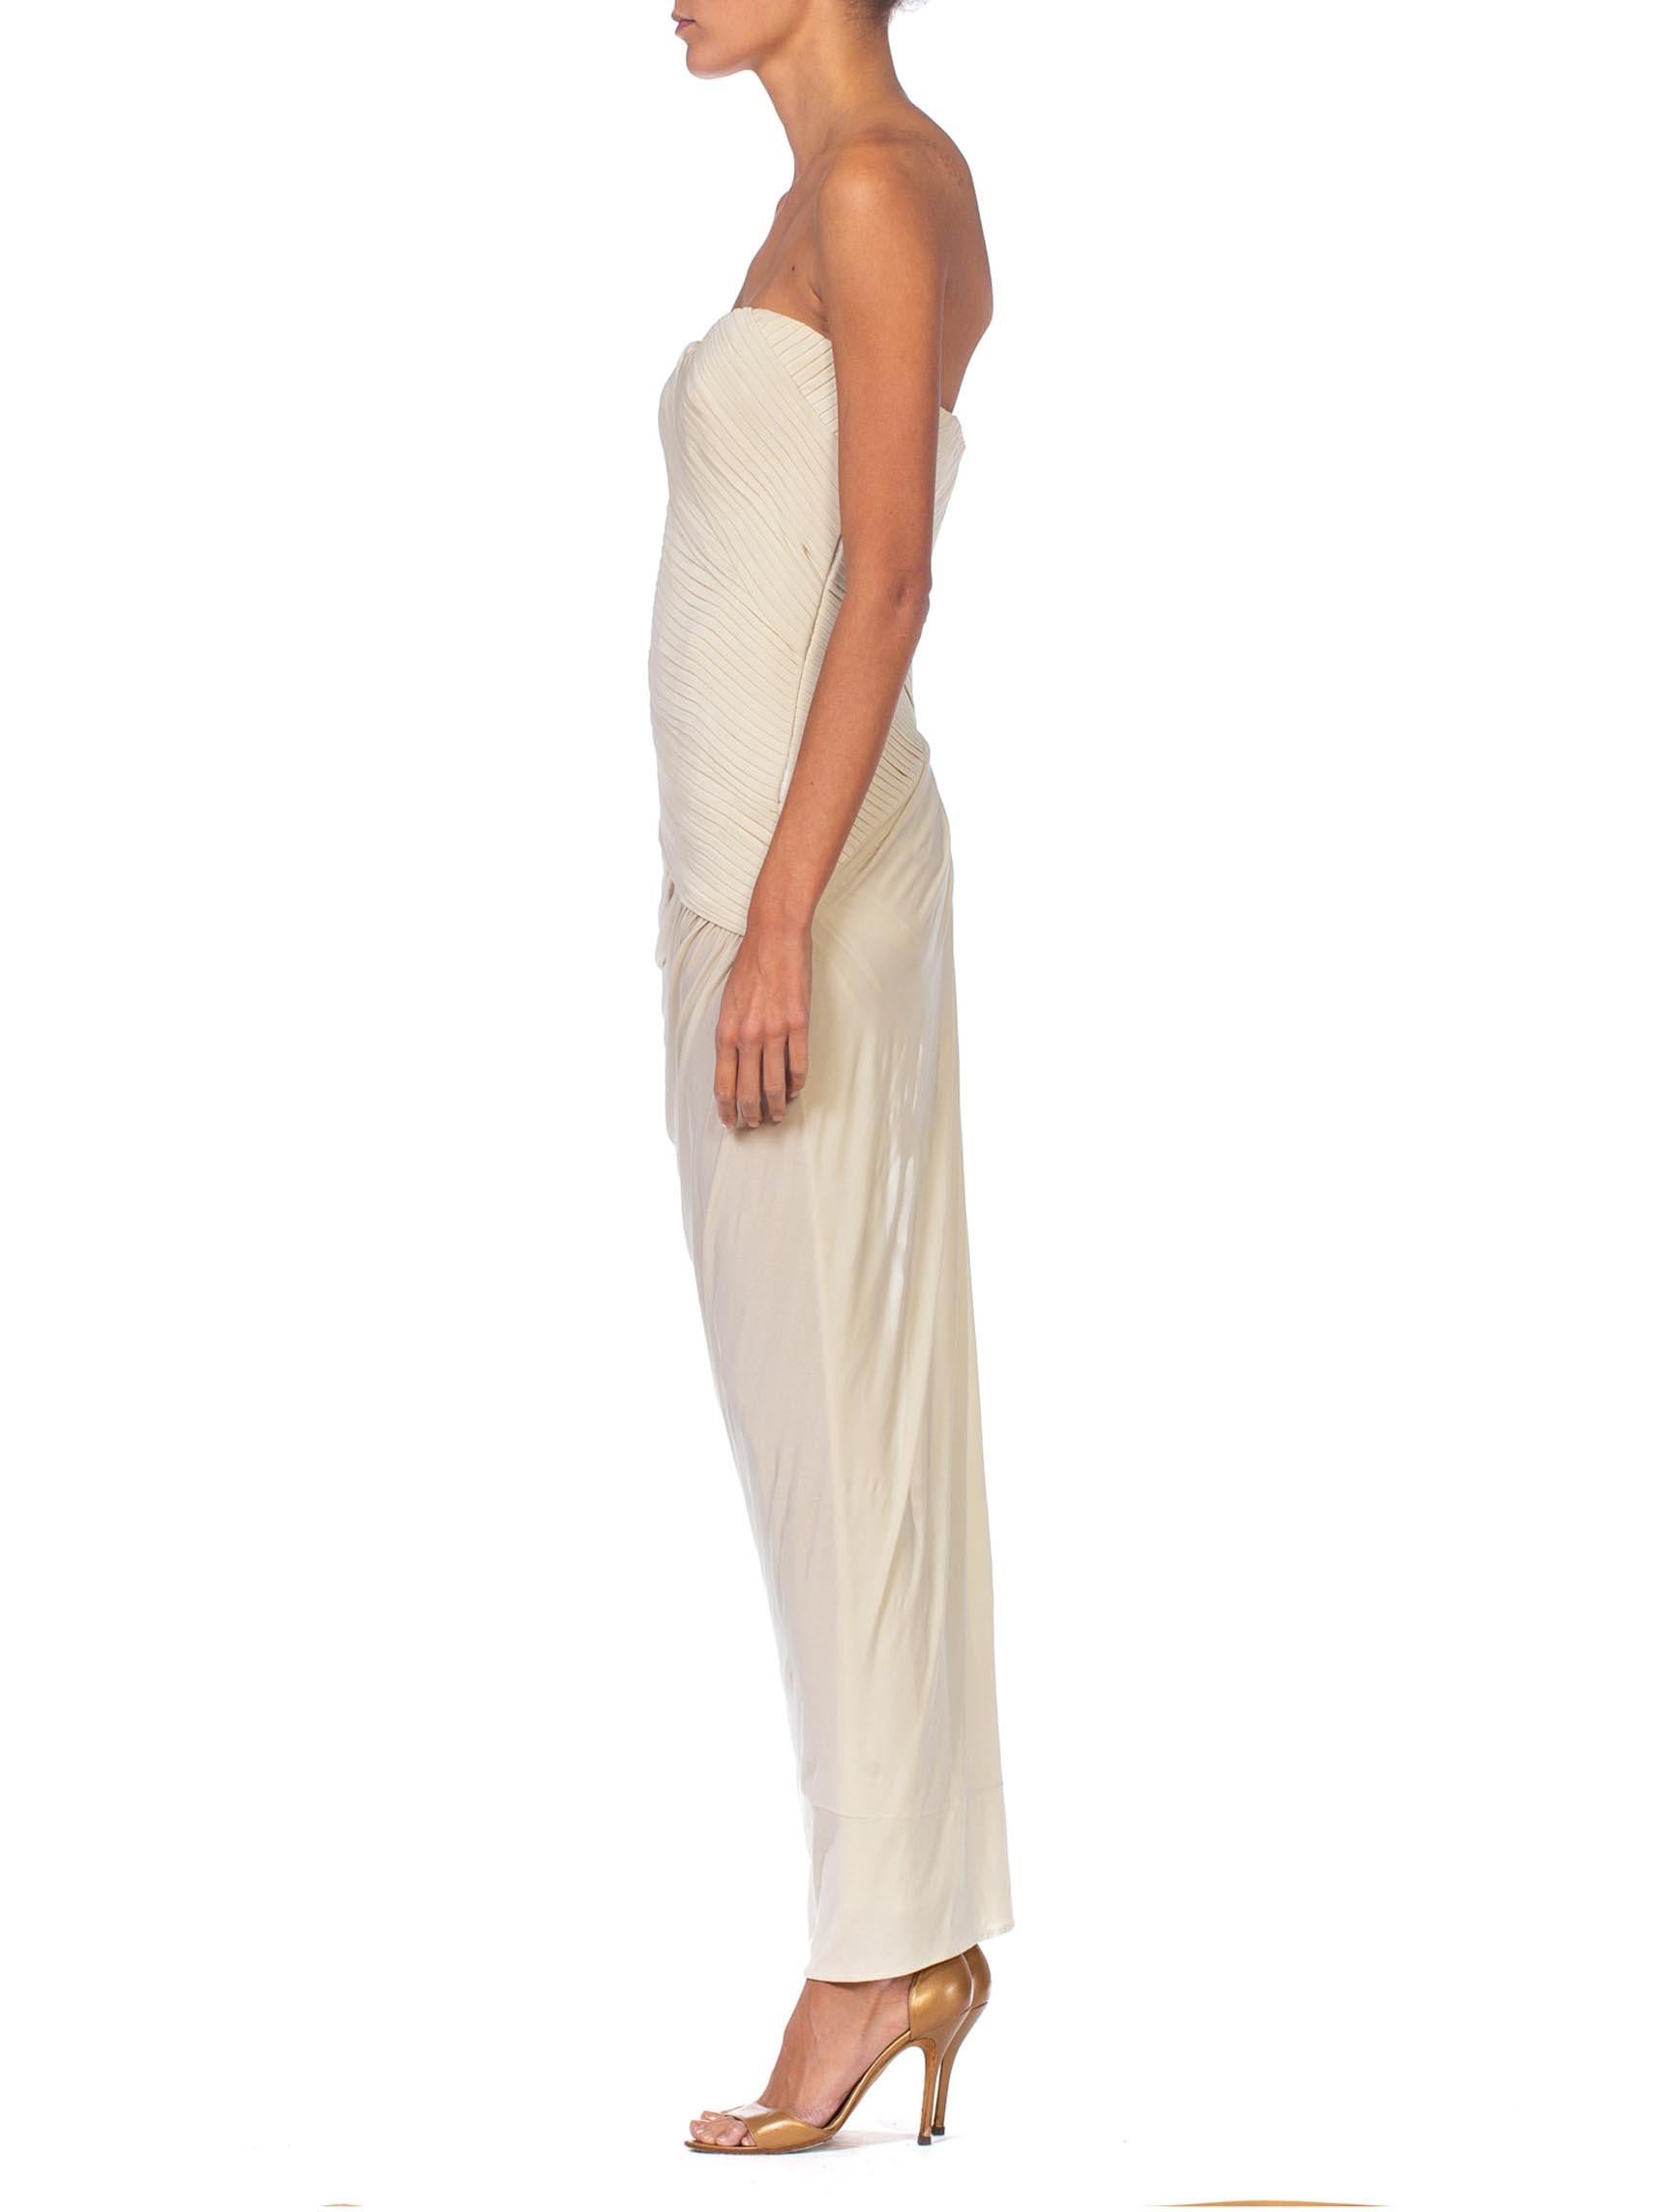 Women's 1990's Donna Karen Strapless Oyster White Jersey Gown With Built In Bustier